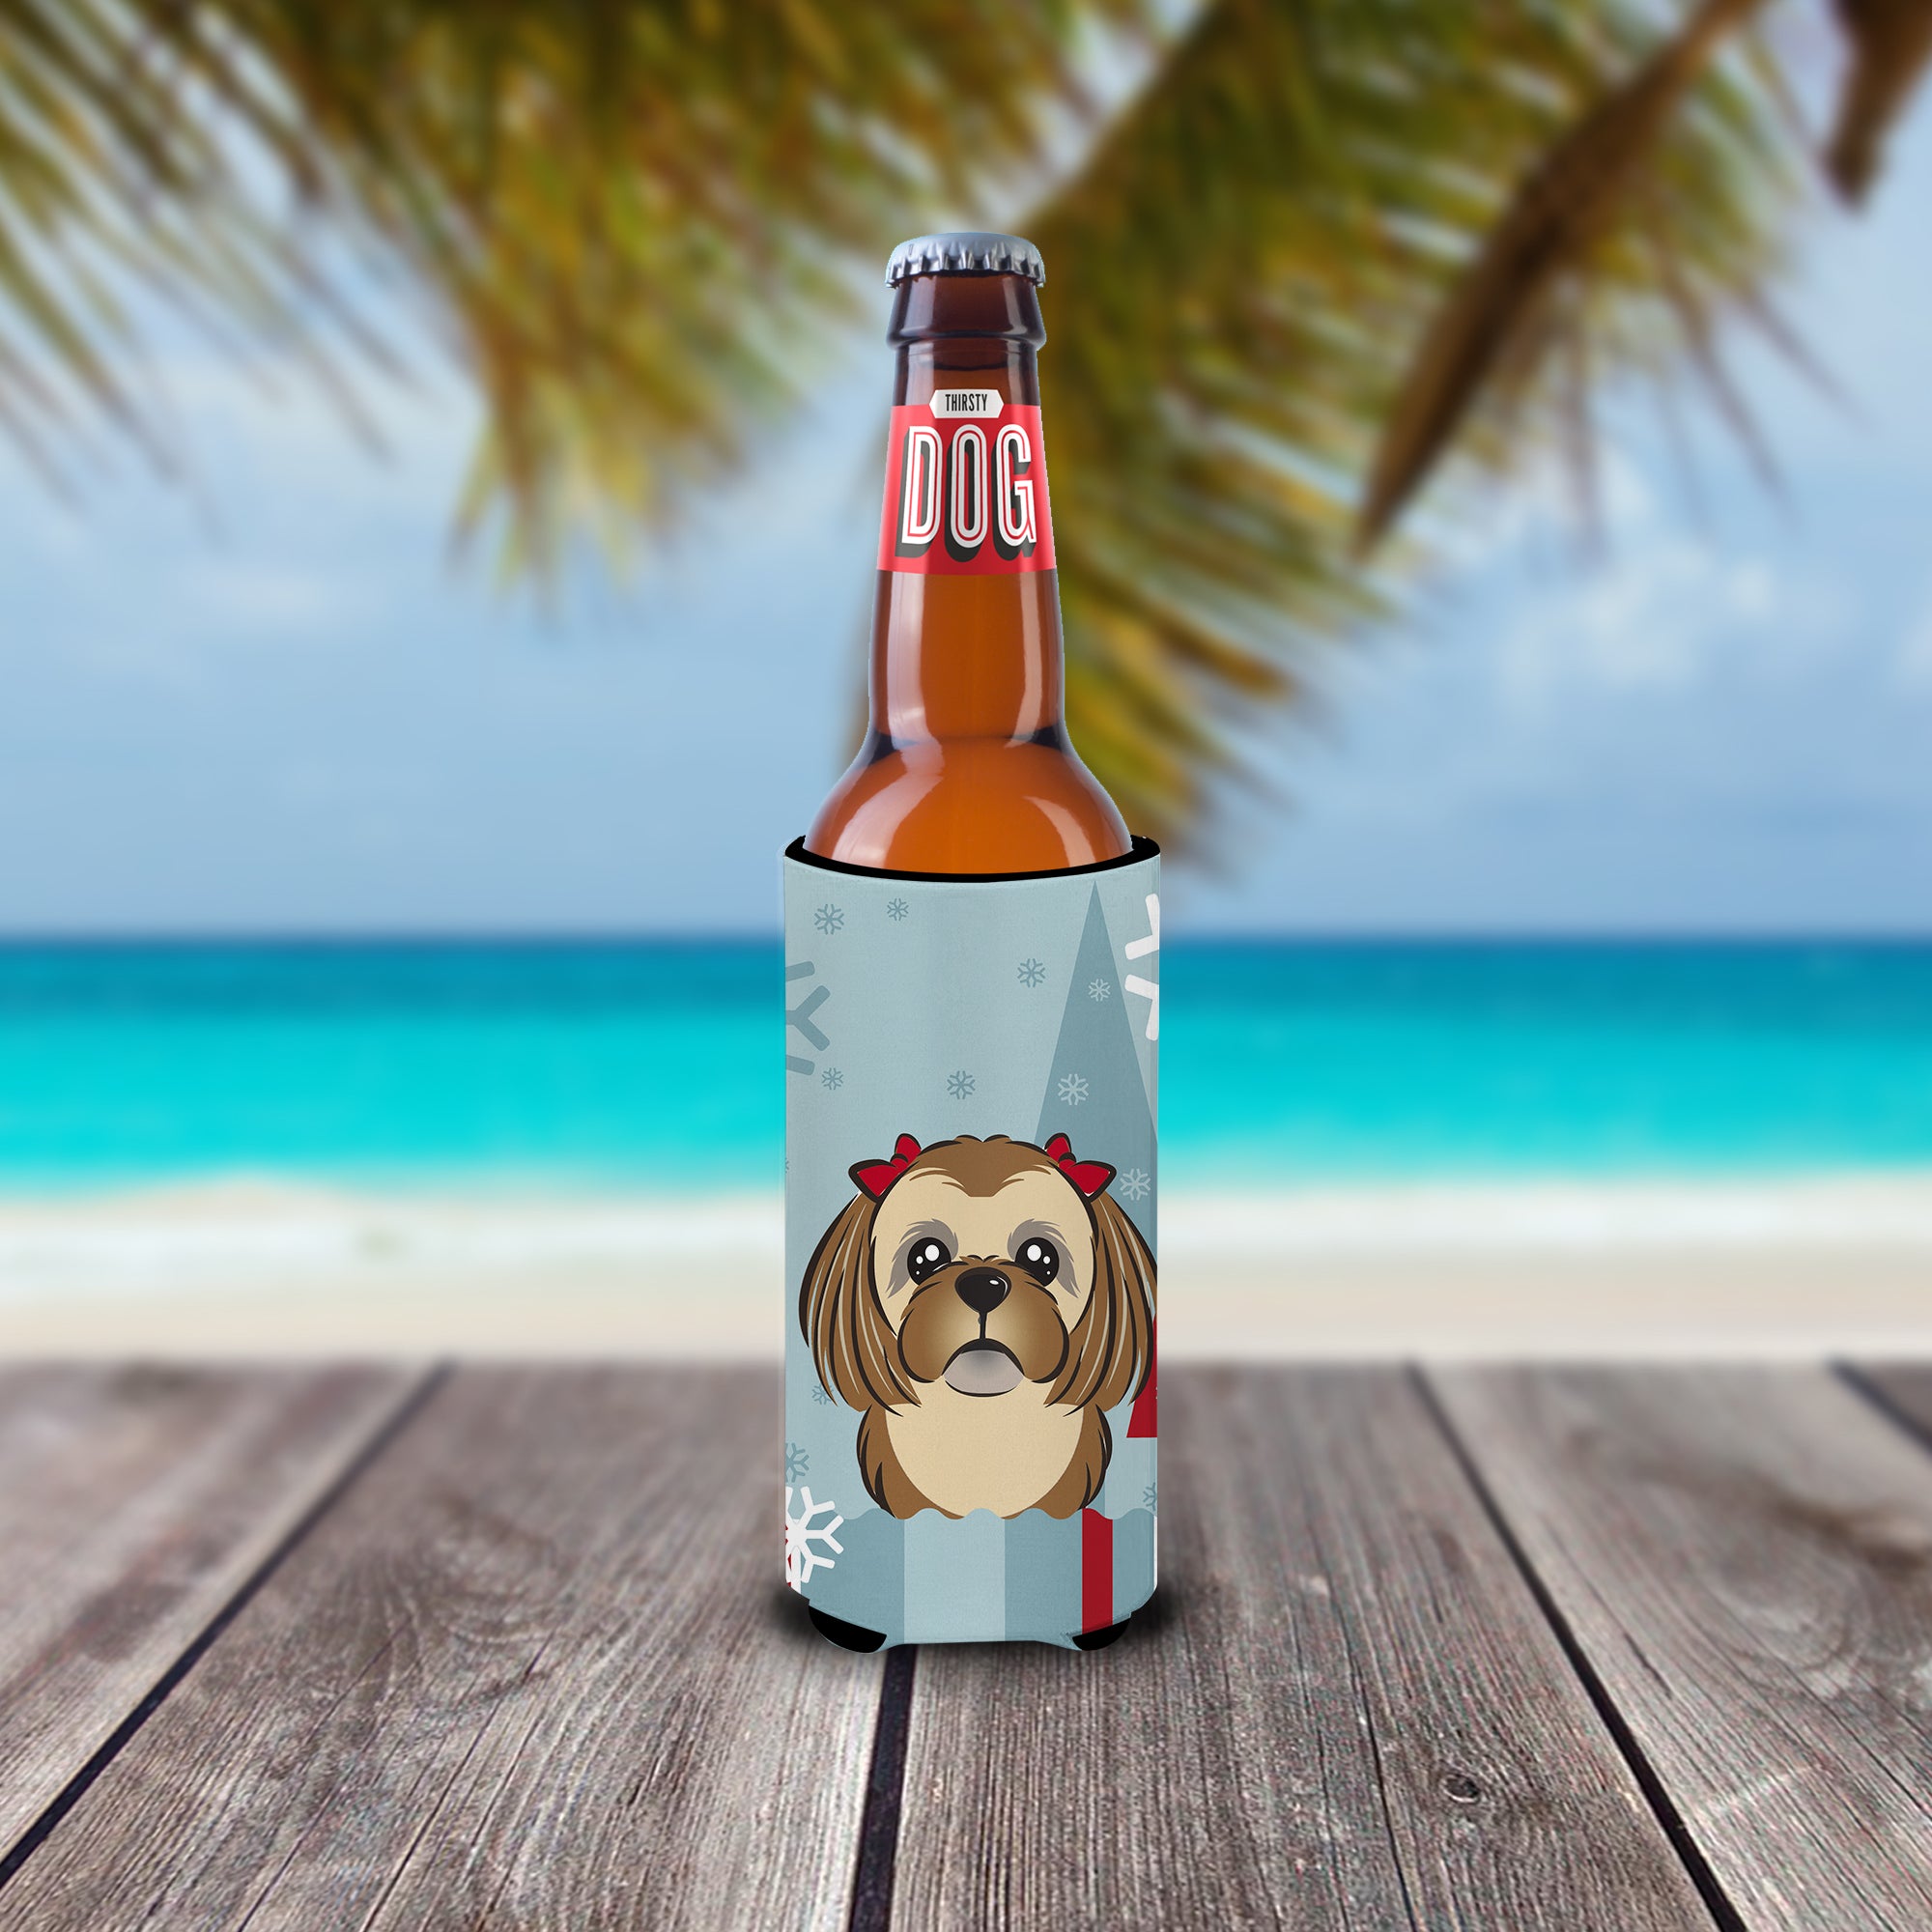 Winter Holiday Chocolate Brown Shih Tzu Ultra Beverage Insulators for slim cans BB1745MUK  the-store.com.